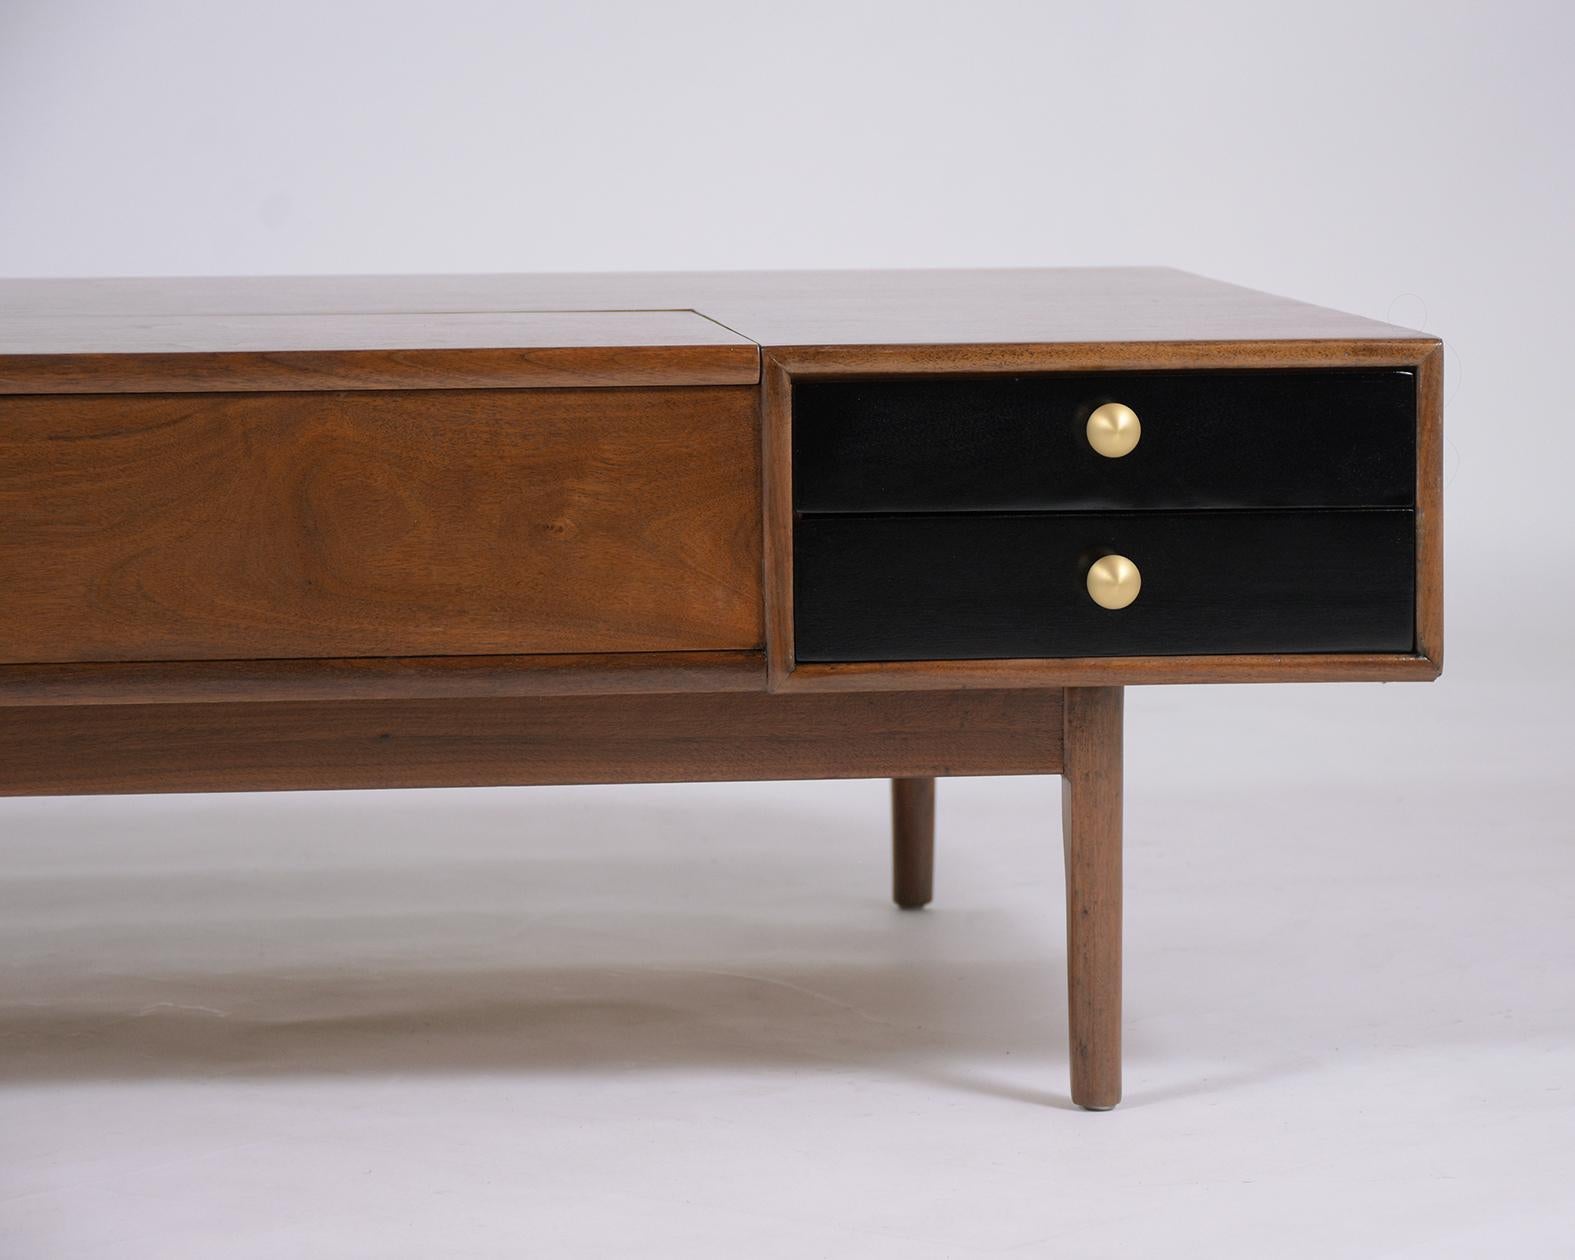 American Mid-Century Modern Walnut Lacquered Coffee Table